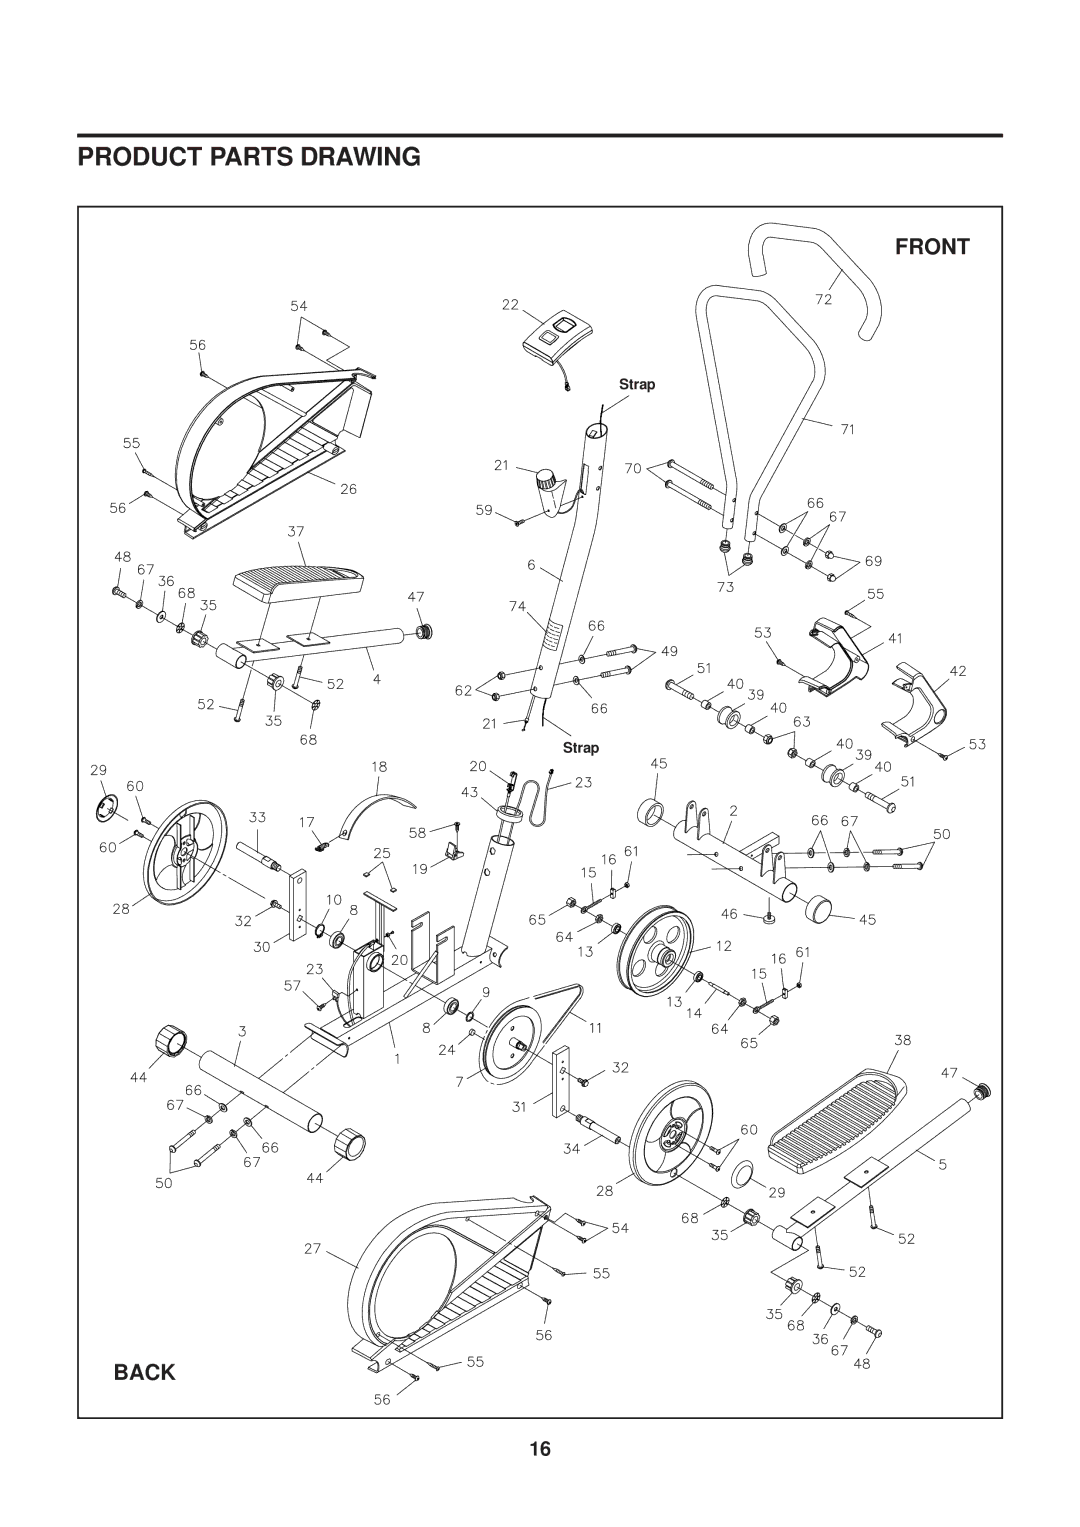 Stamina Products E100 owner manual Product Parts Drawing 